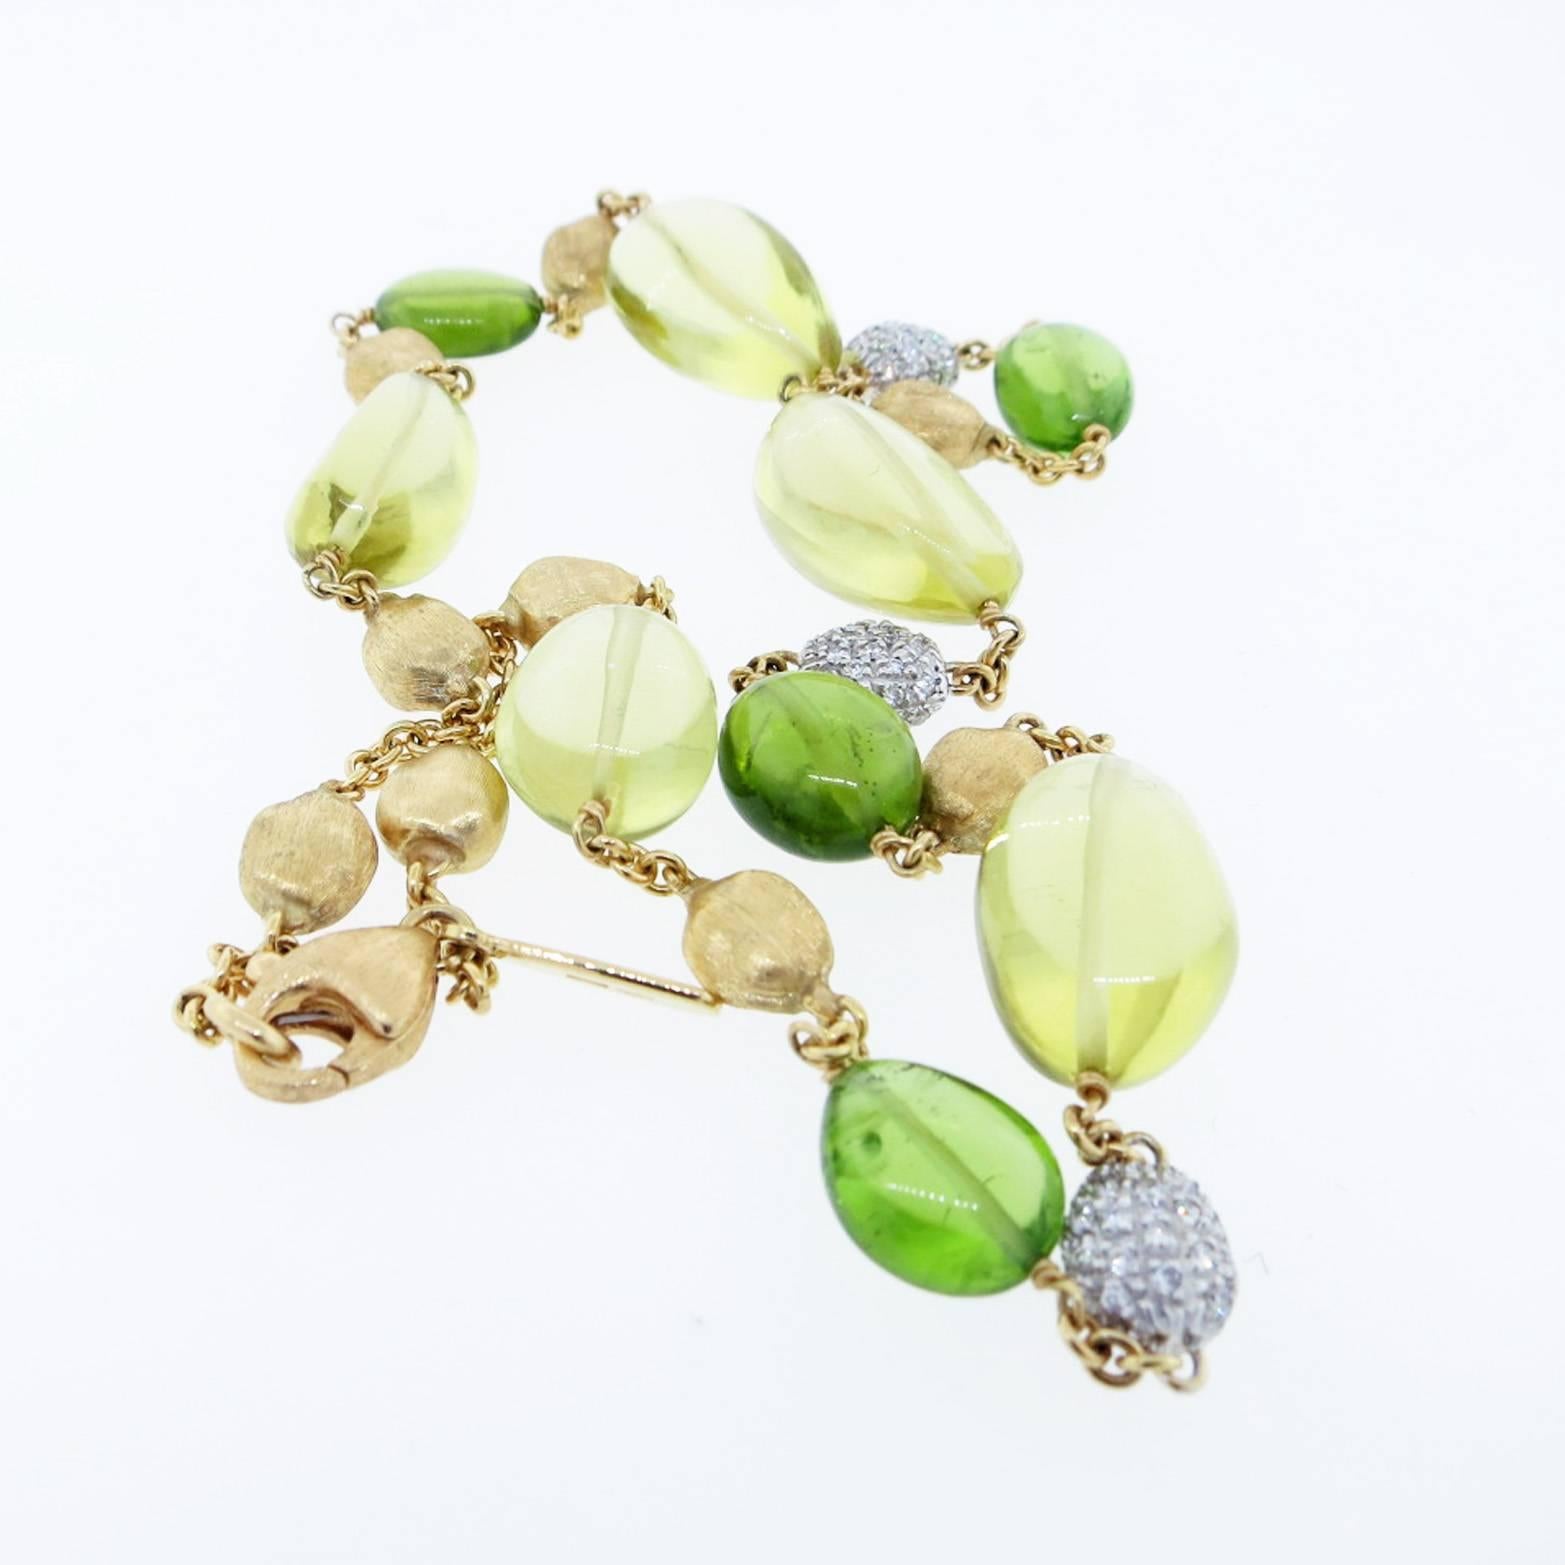 18kt. yellow gold link necklace made by the Italian jeweler Marco Bicego. The 16 inch necklace is strung with a mix of  polished citrine and peridot beads mixed with  Marco Bicego signature gold beads . There are three white gold beads paved with